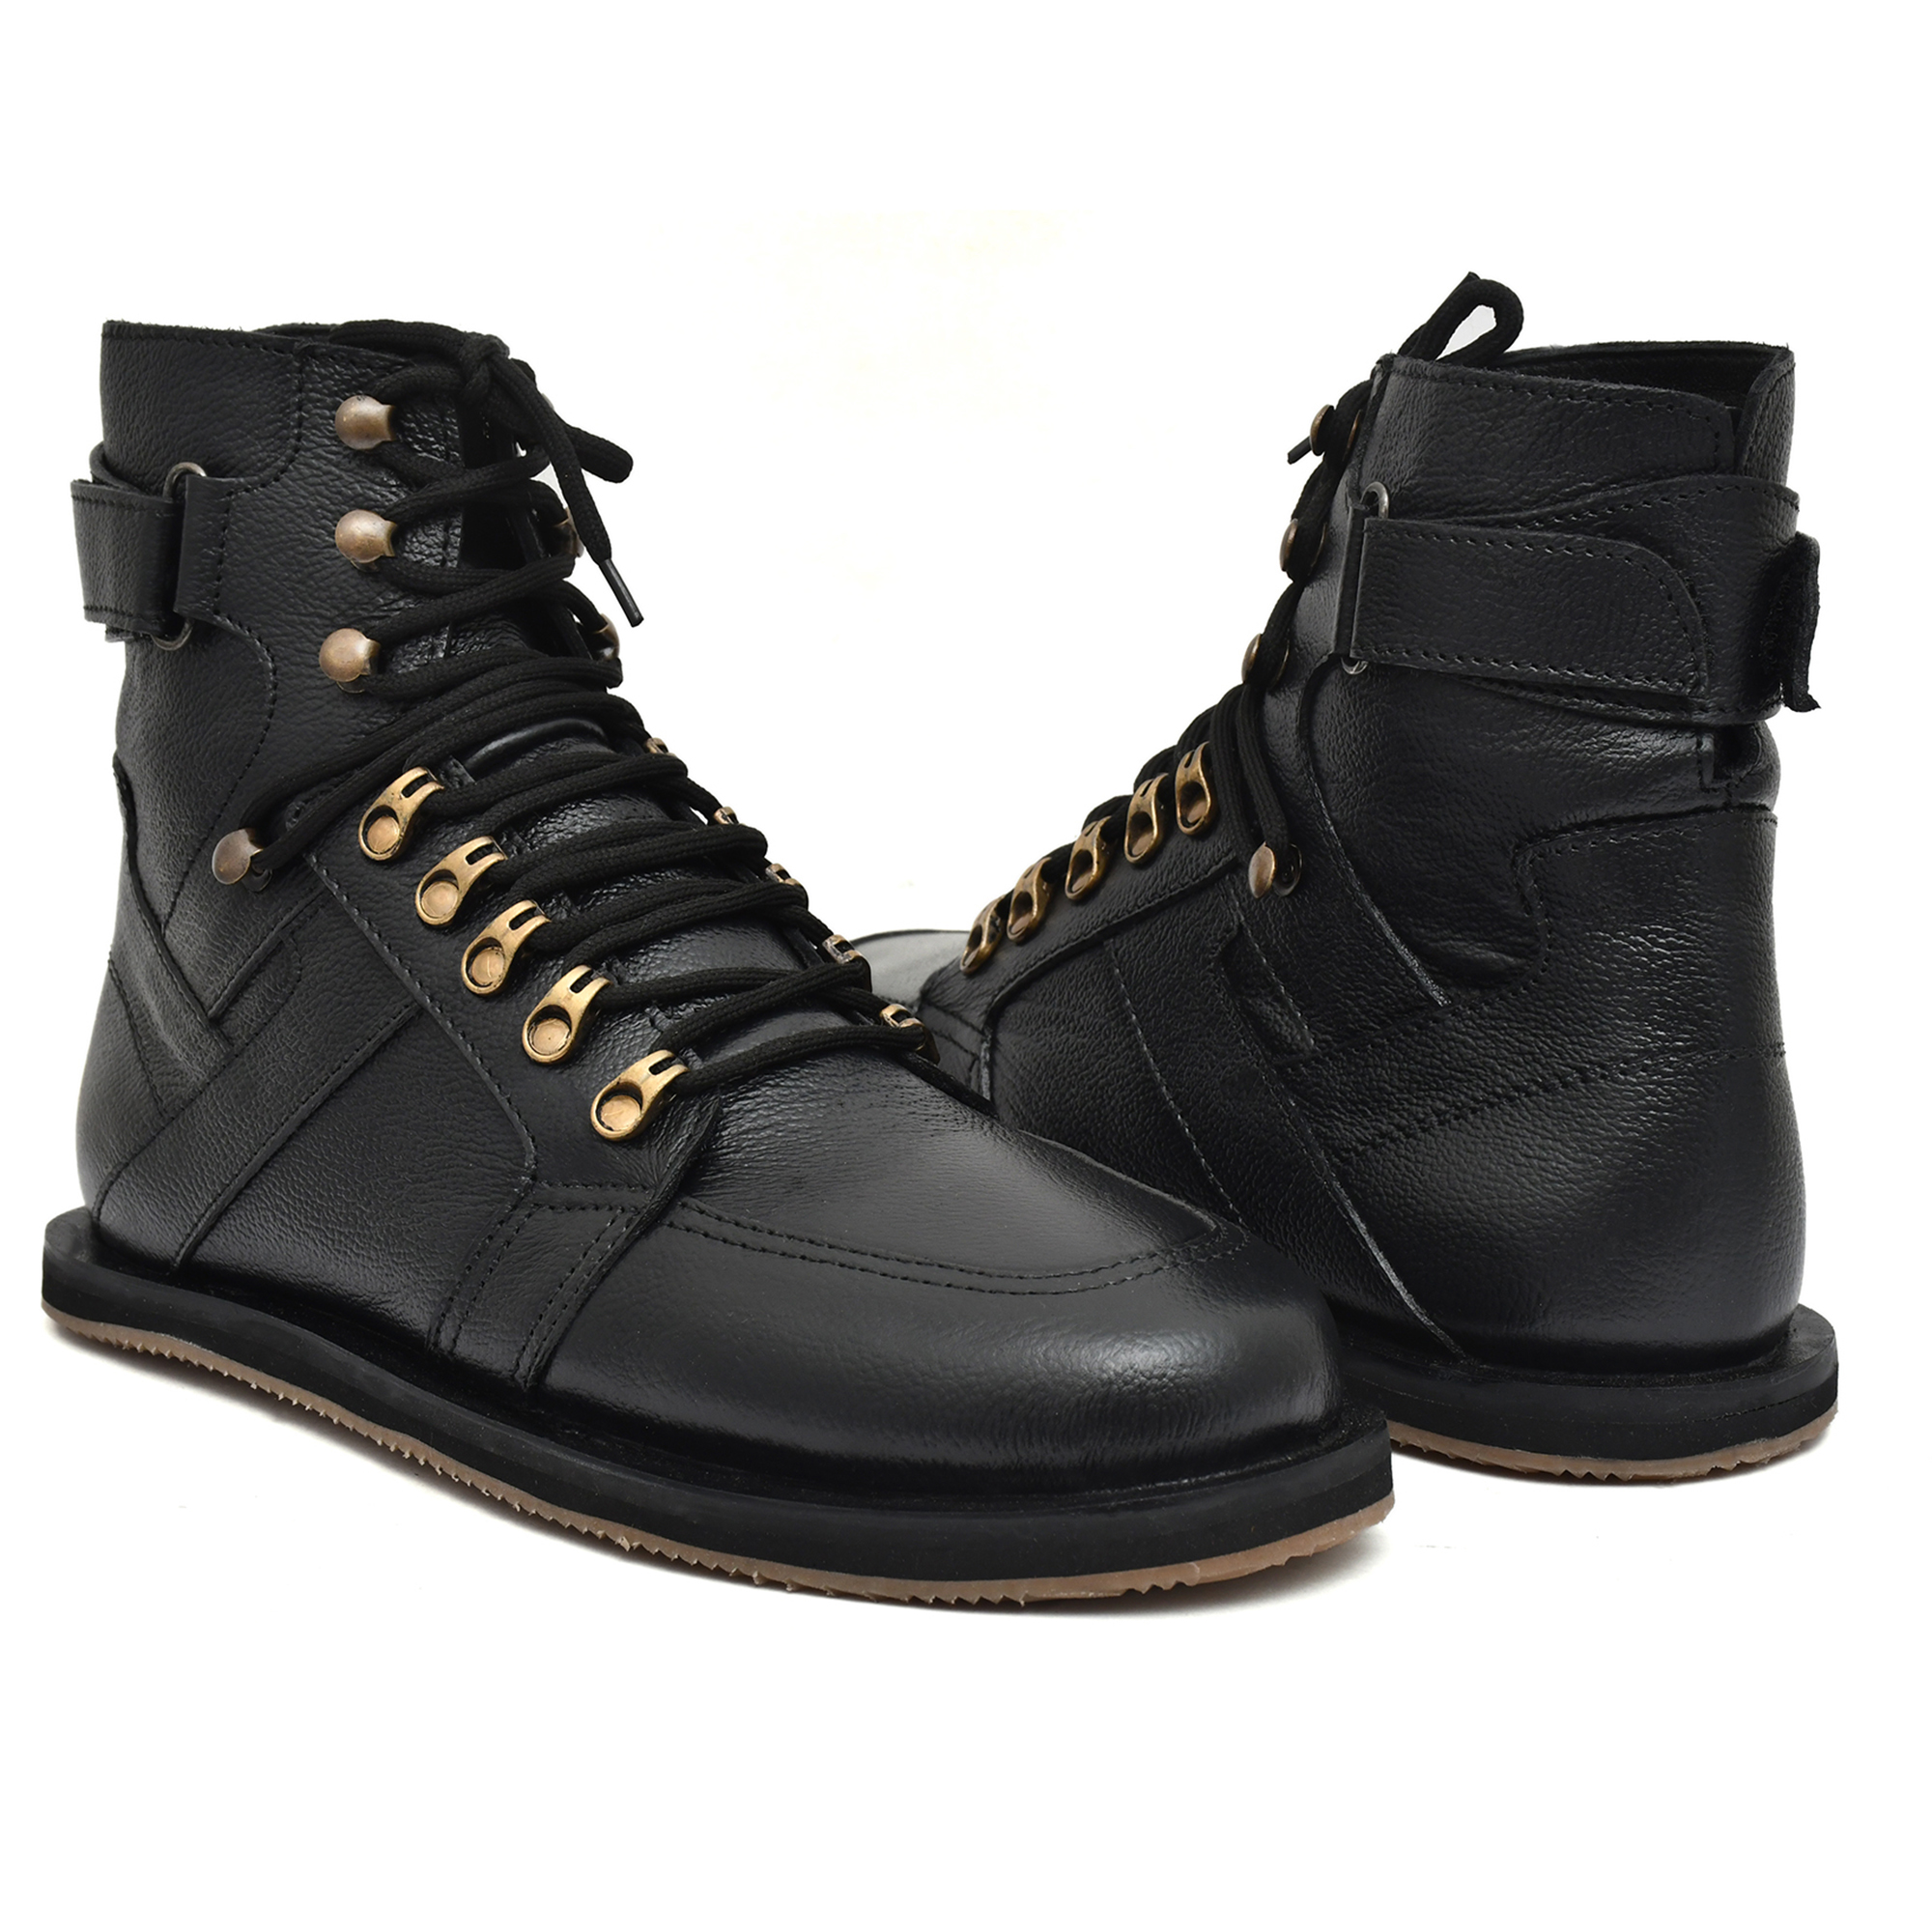 Shooting Boots for Rifle : Rifle leather boots, highly recommended for professional shooters.